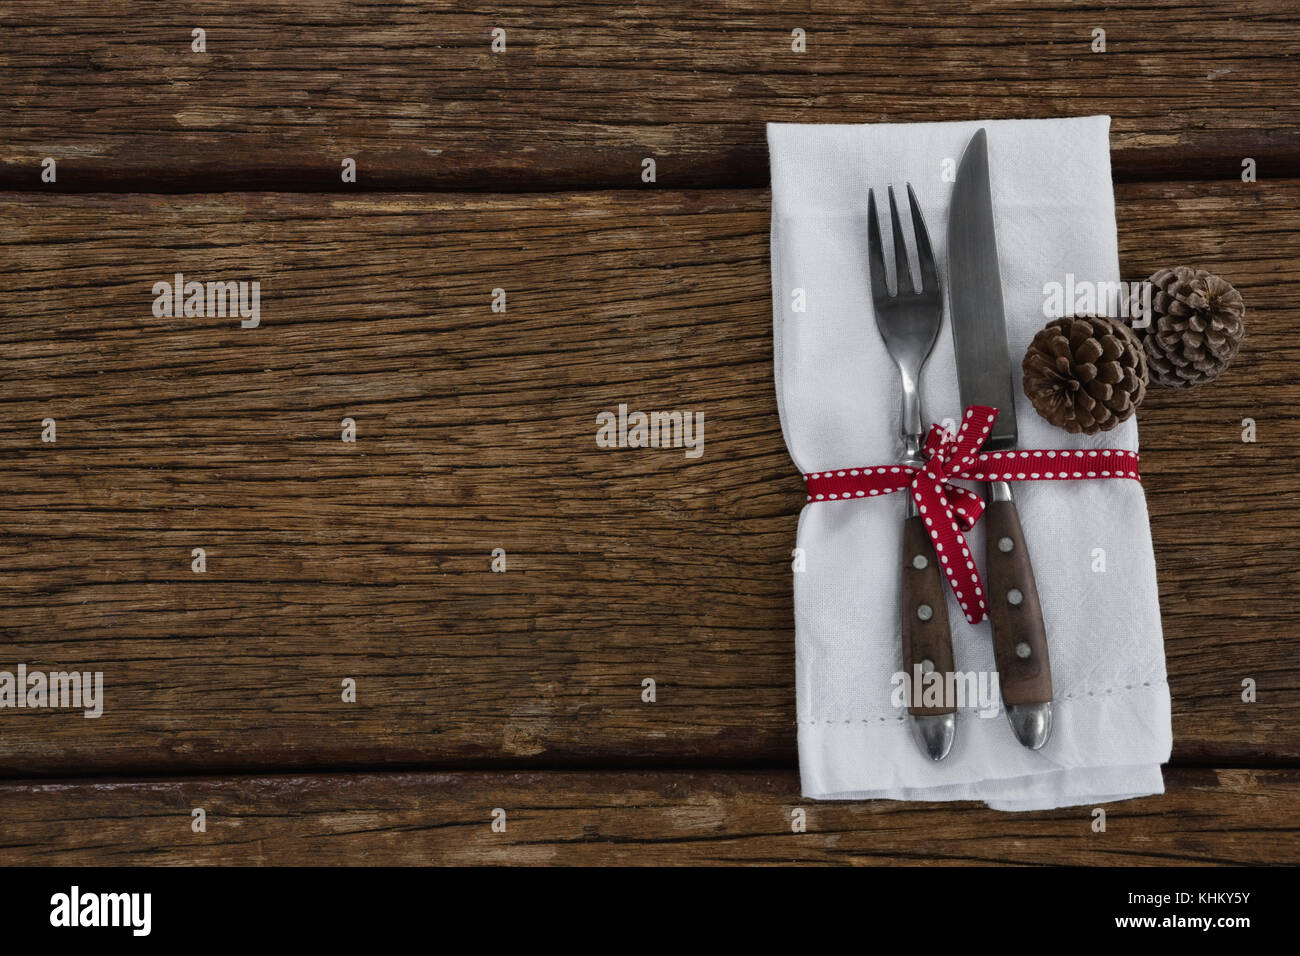 Overhead view of pine cone with fork, butter knife and napkin tied up ...